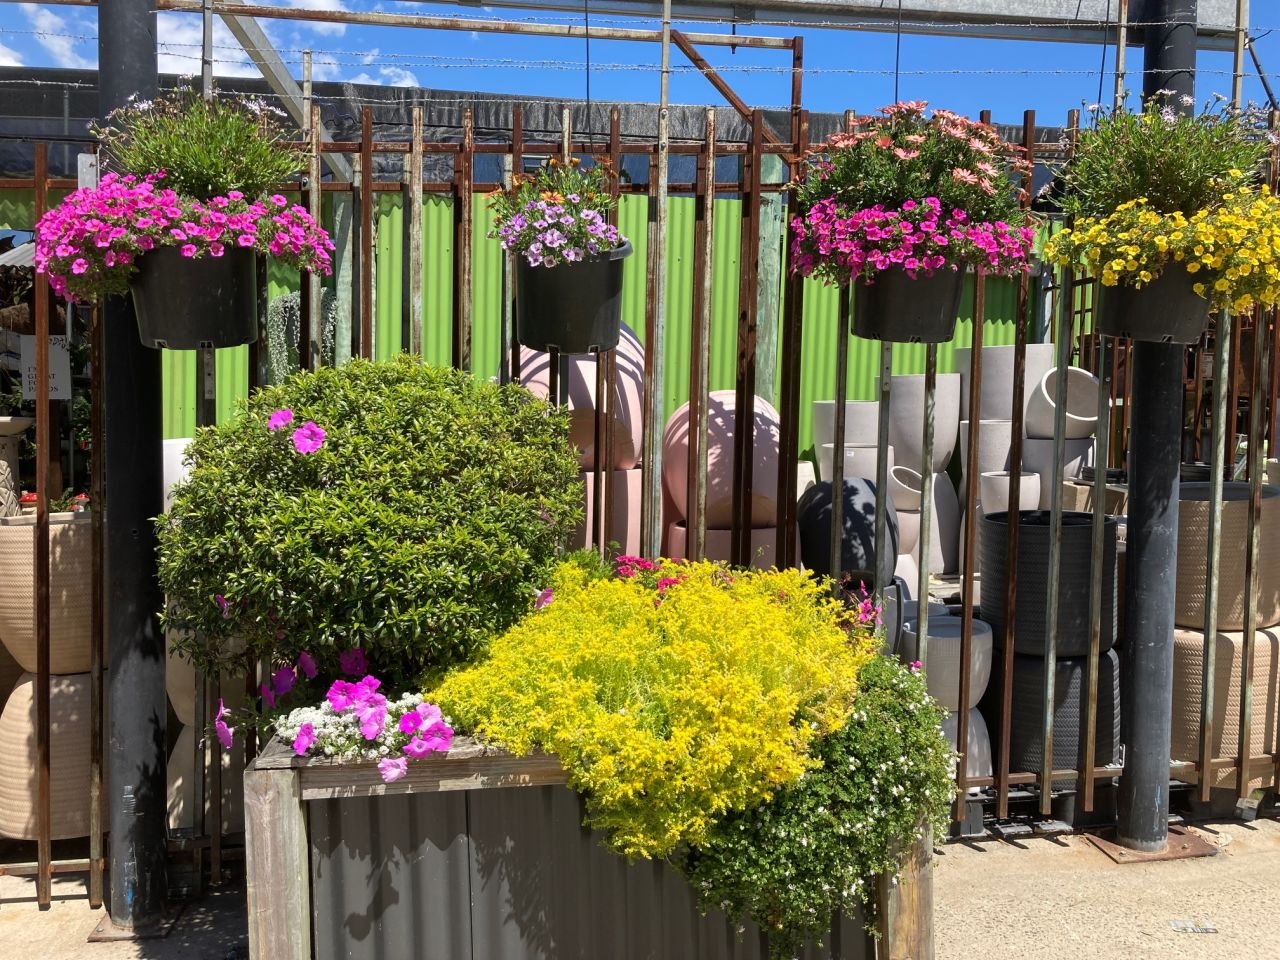 Members and guests visited the Plant Shack at Deception Bay to browse the spring display during a day outing in Sept 2021